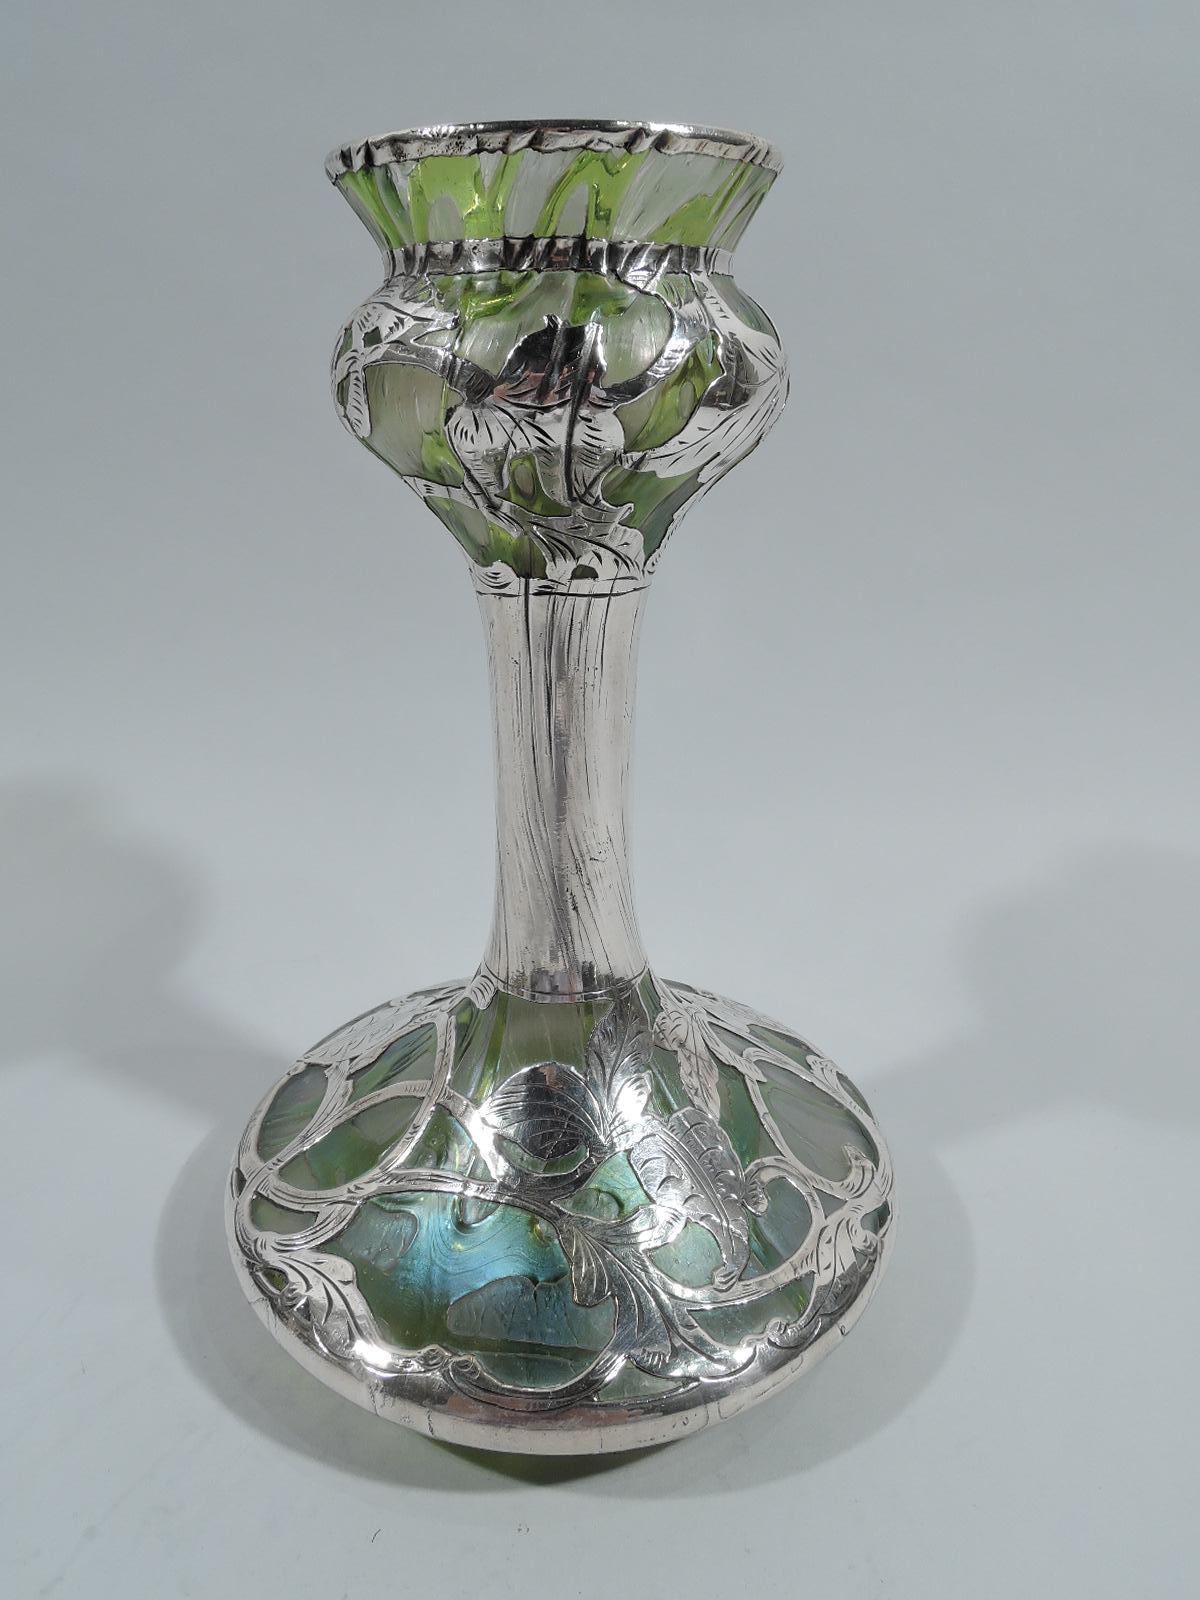 Beautiful turn-of-the-century Art Nouveau glass vase by historic Loetz with engraved silver overlay. Round and tapering bowl with flared rim, tall cylindrical shaft, and wide bellied bowl. Interlay in form of leaves with entwined and scrolling